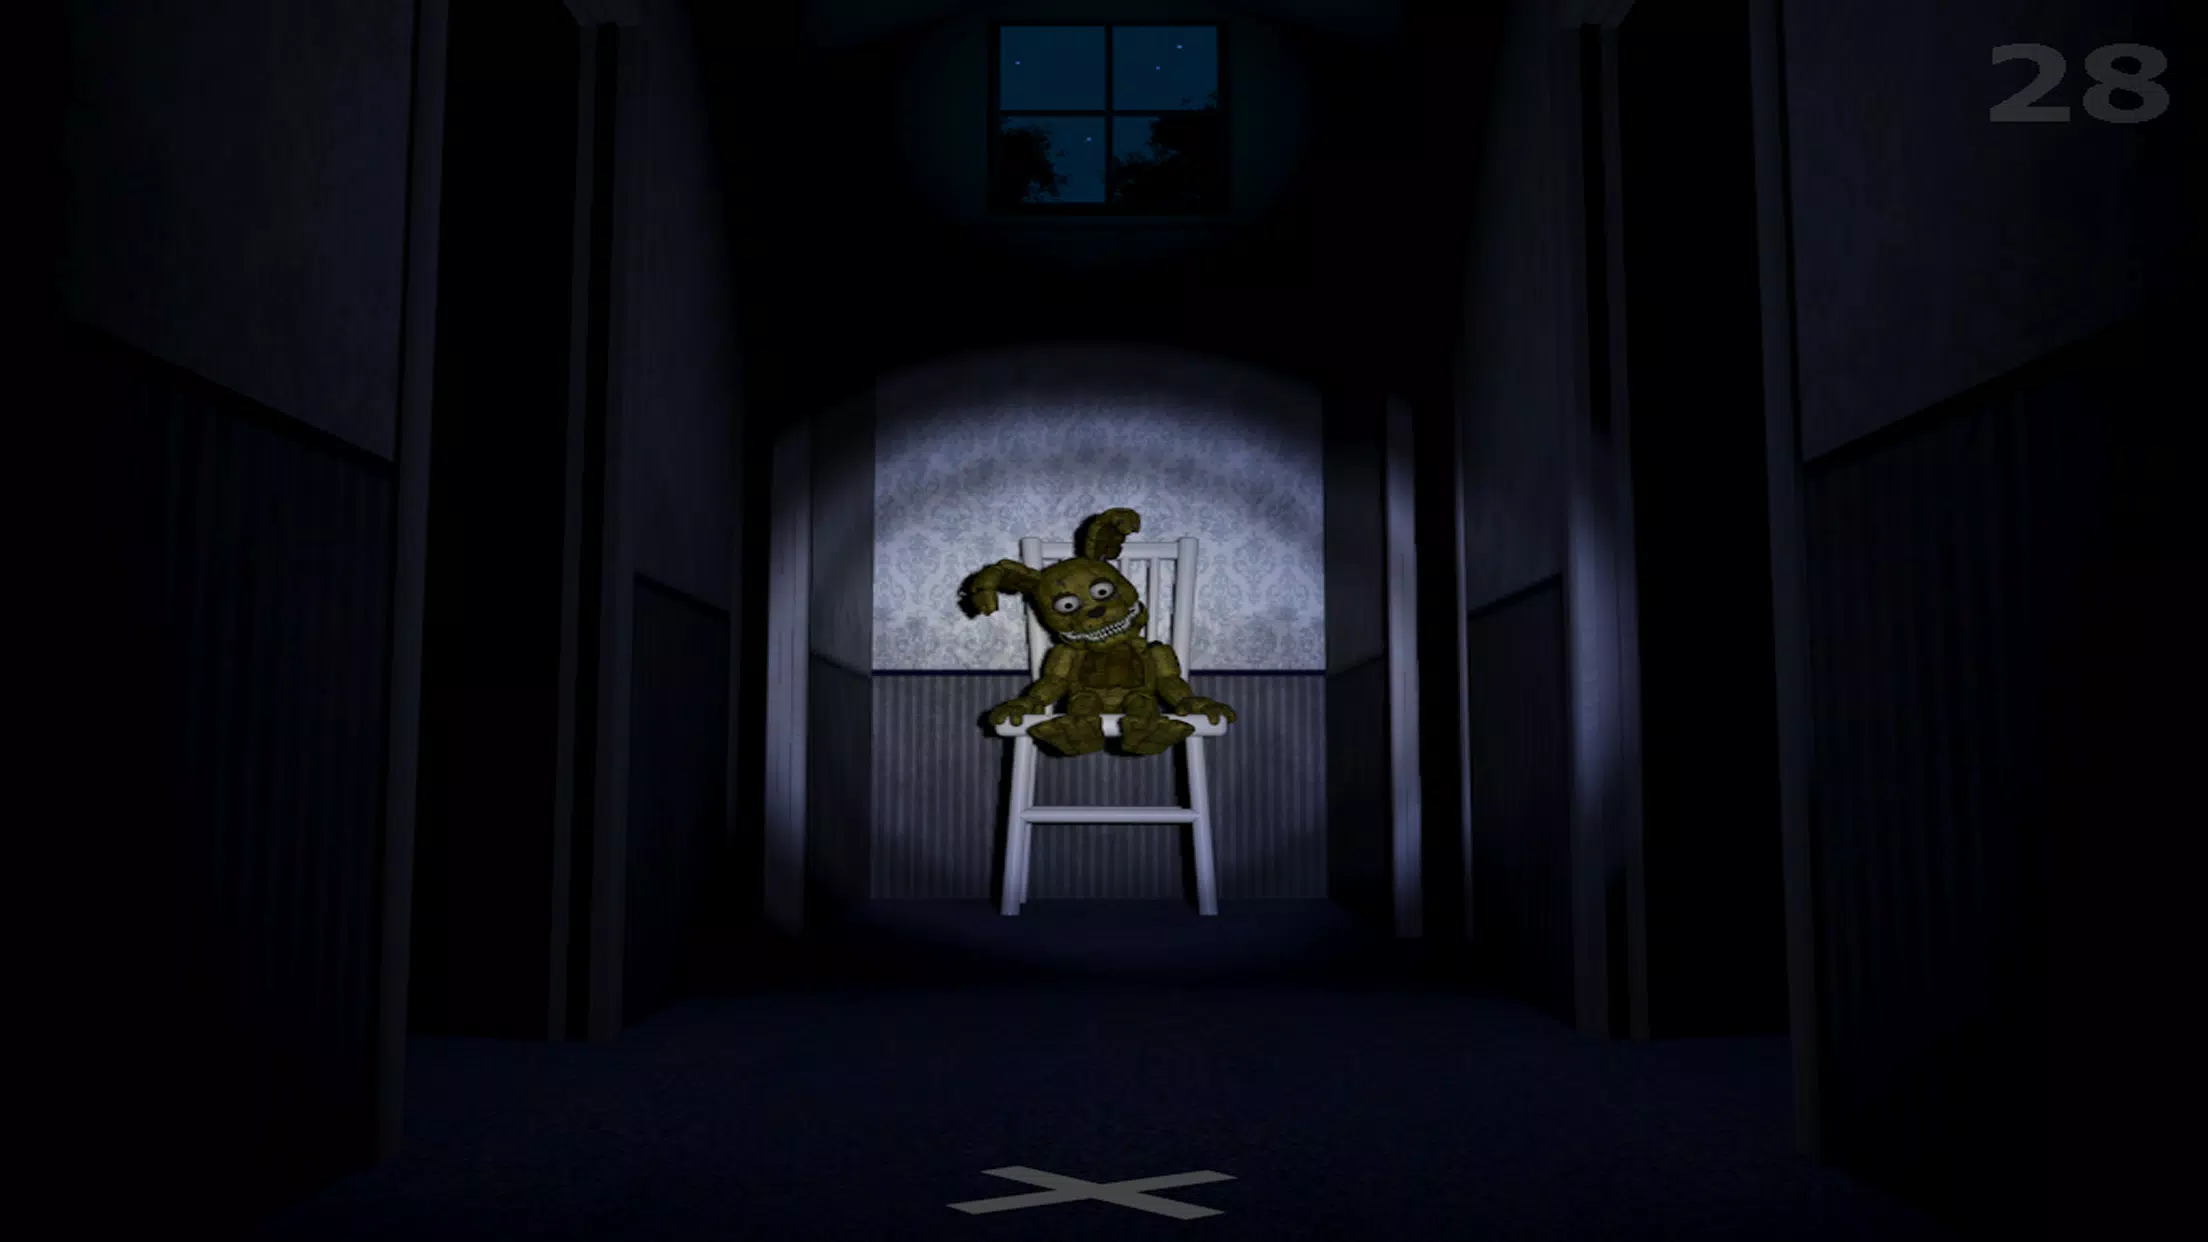 Five Nights At Freddy's 4 APK For Android Free Download - FNaF Fangame